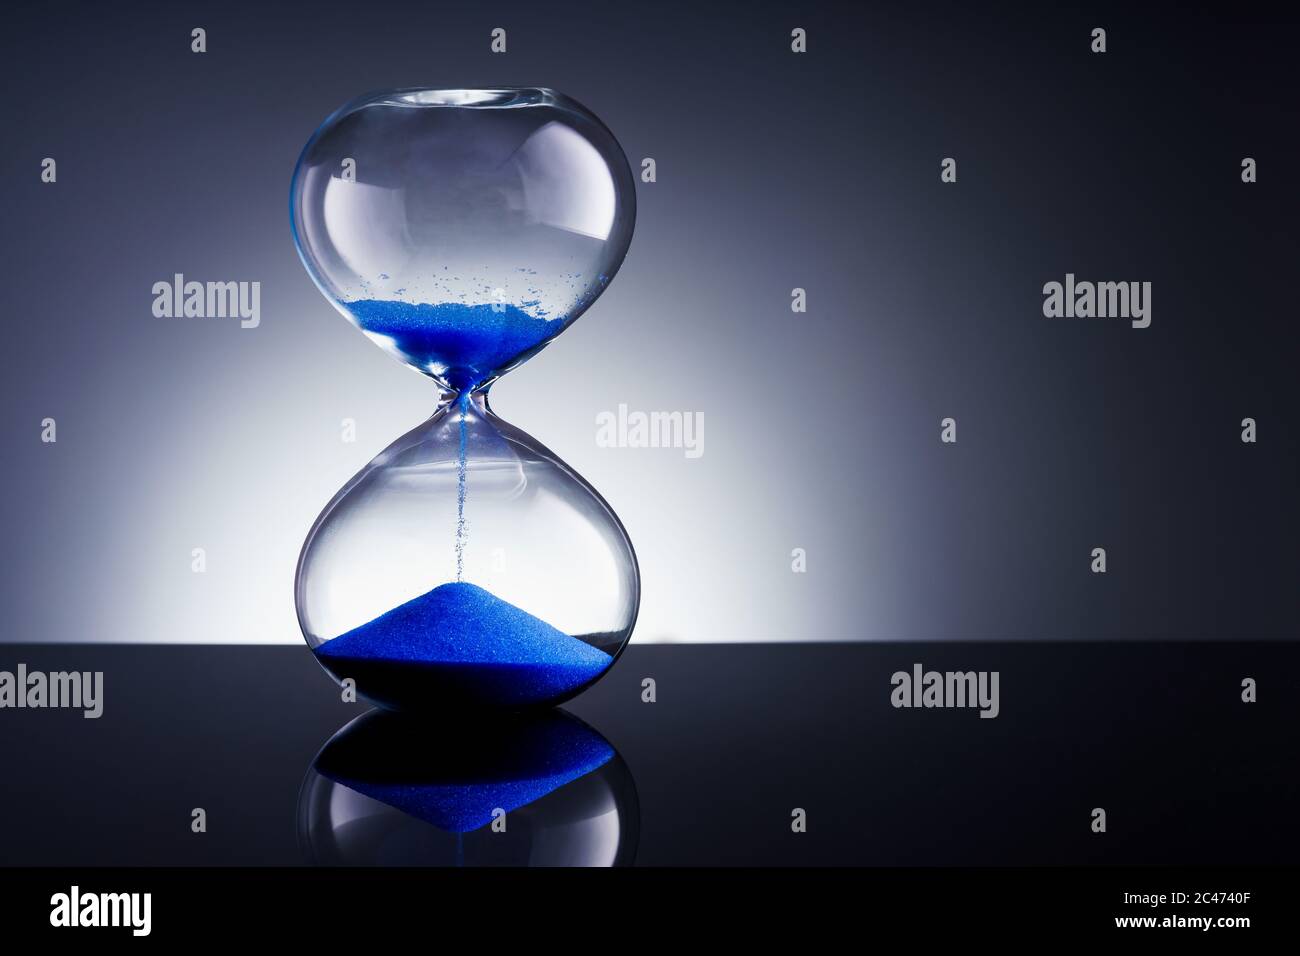 Flowing blue sand hourglass Stock Photo